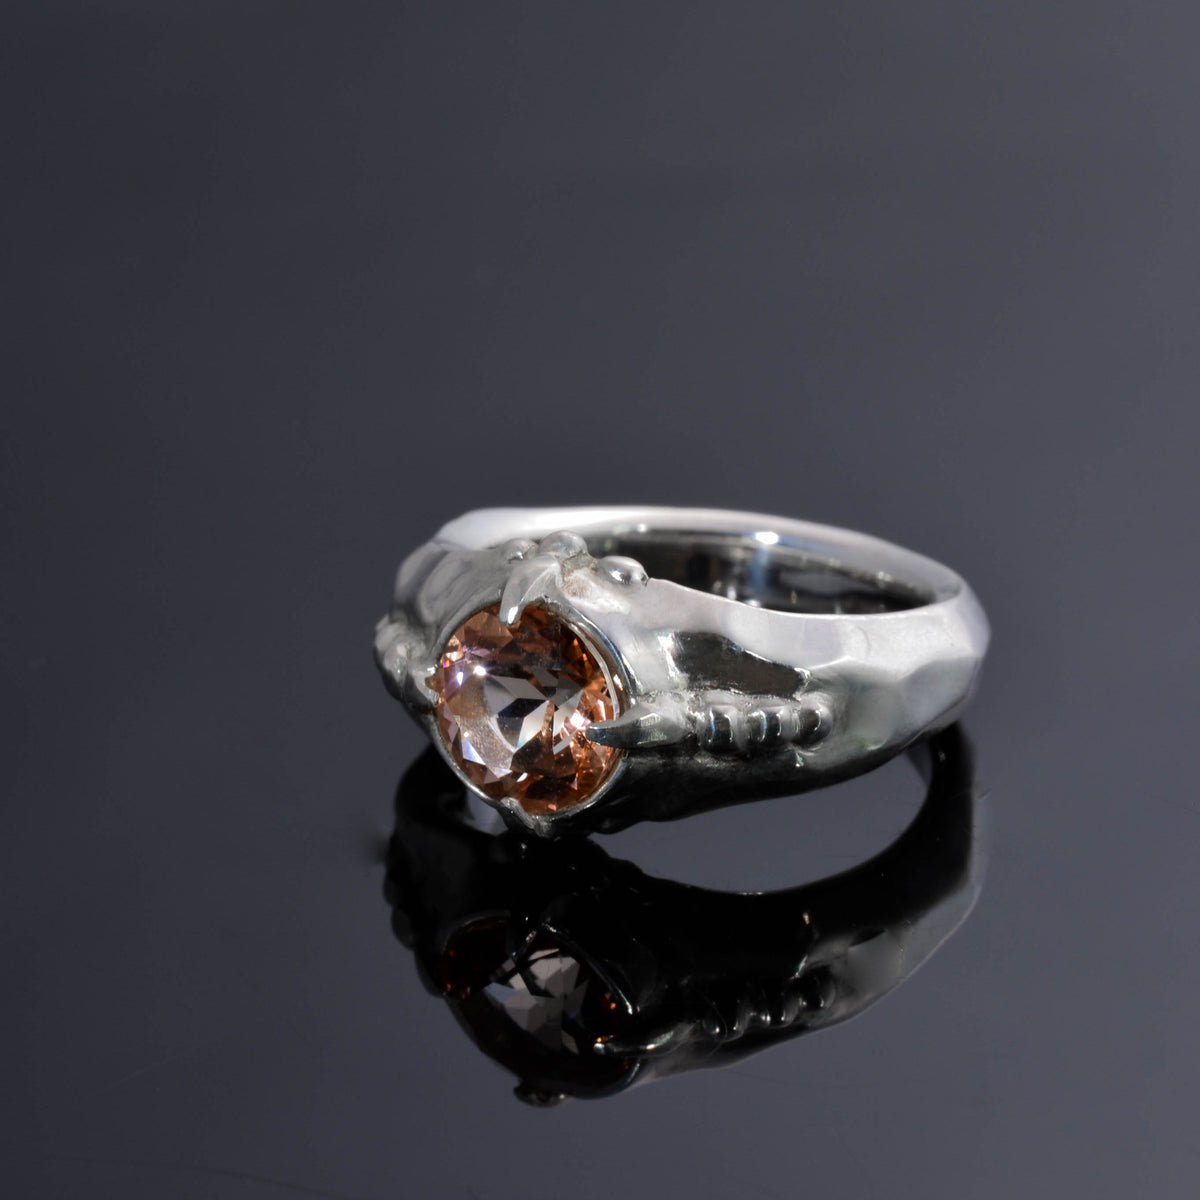 &quot;Organic Elegance: Handcrafted Silver Ring with Exquisite Carvings and Orange Topaz&quot;